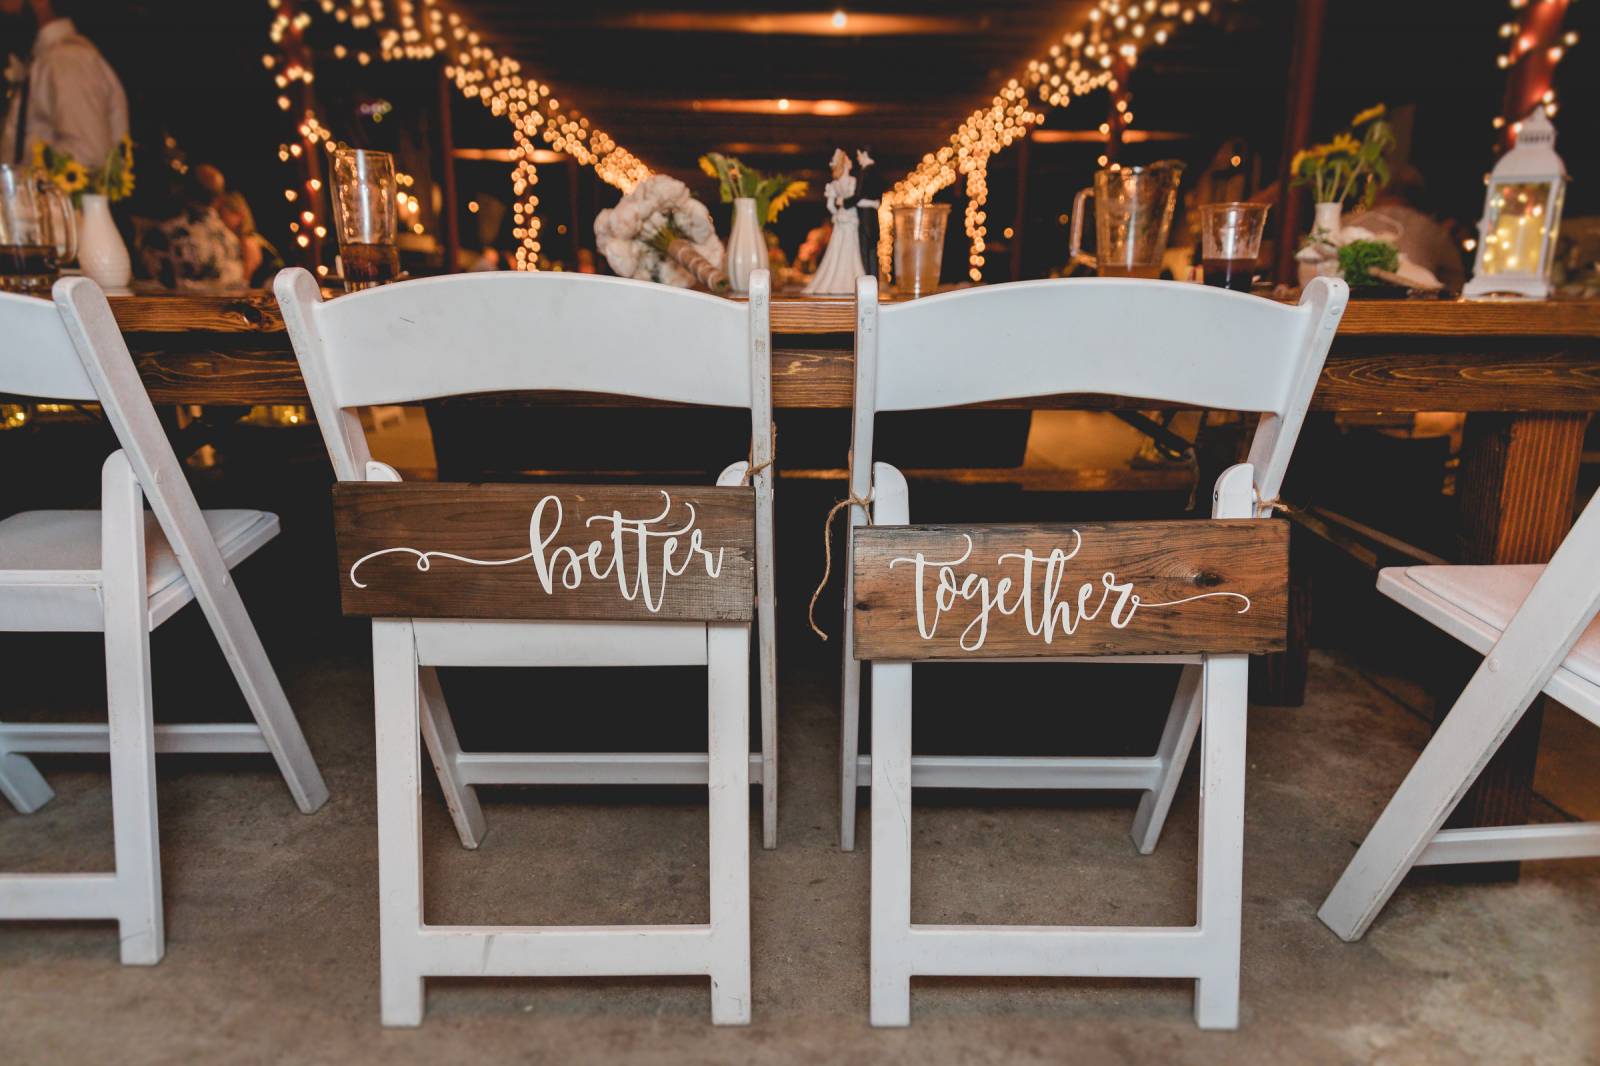 better together chair signs, calligraphy signs